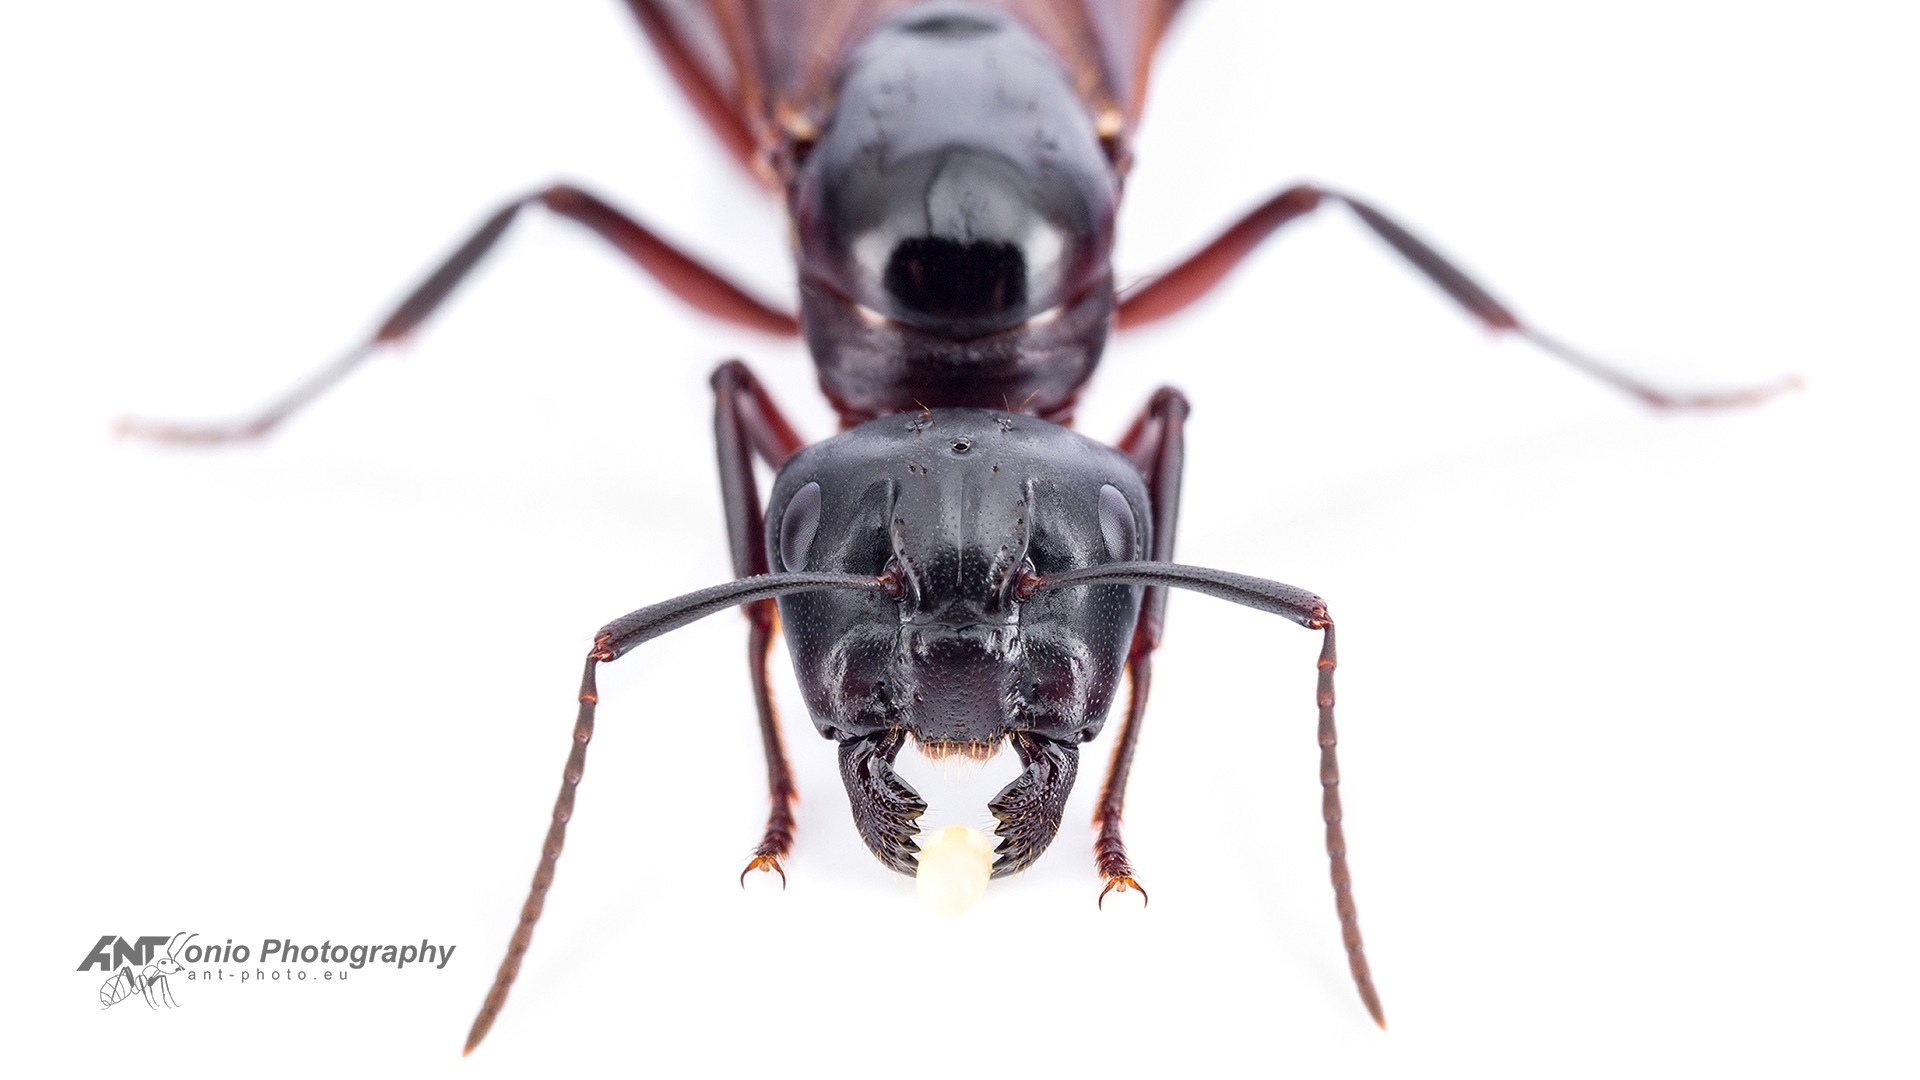 Head of Queen Camponotus ligniperda close up on white background. The queen holds the egg in her jaws